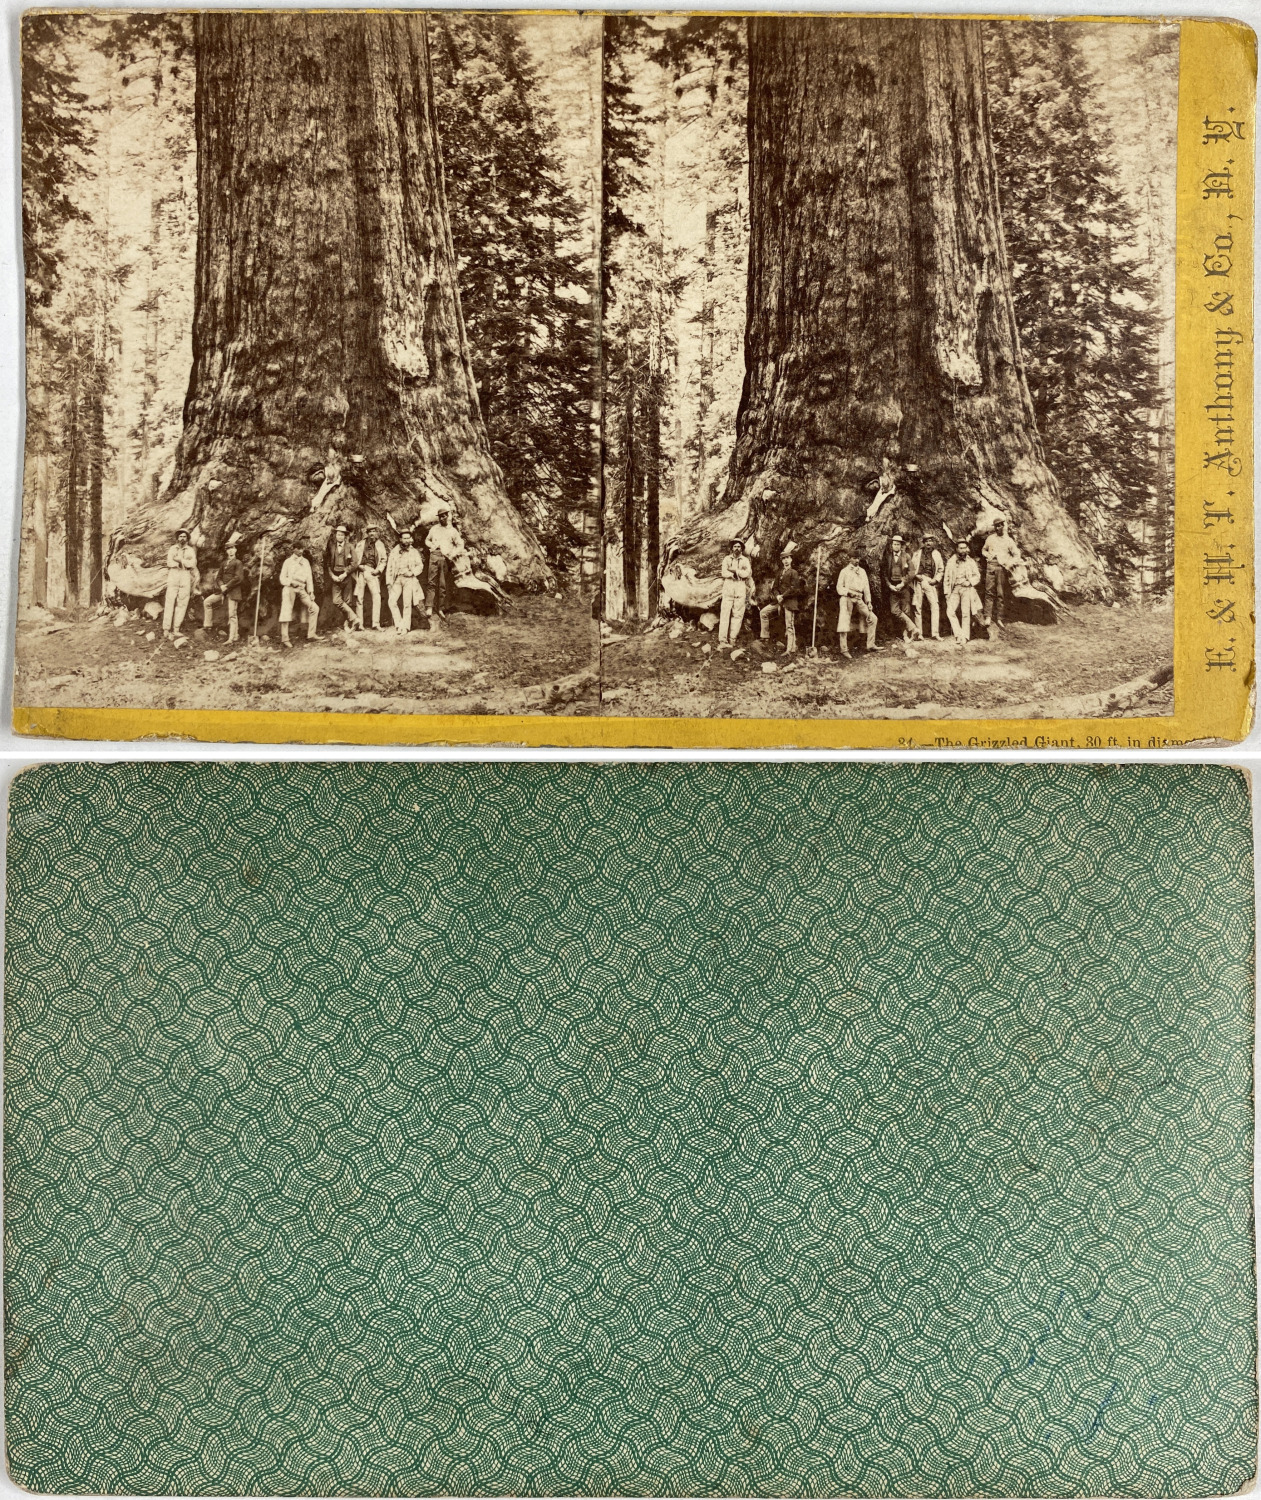 North America, New York, The Grizzled Giant Vintage Stereo Card, E. & H.T. An